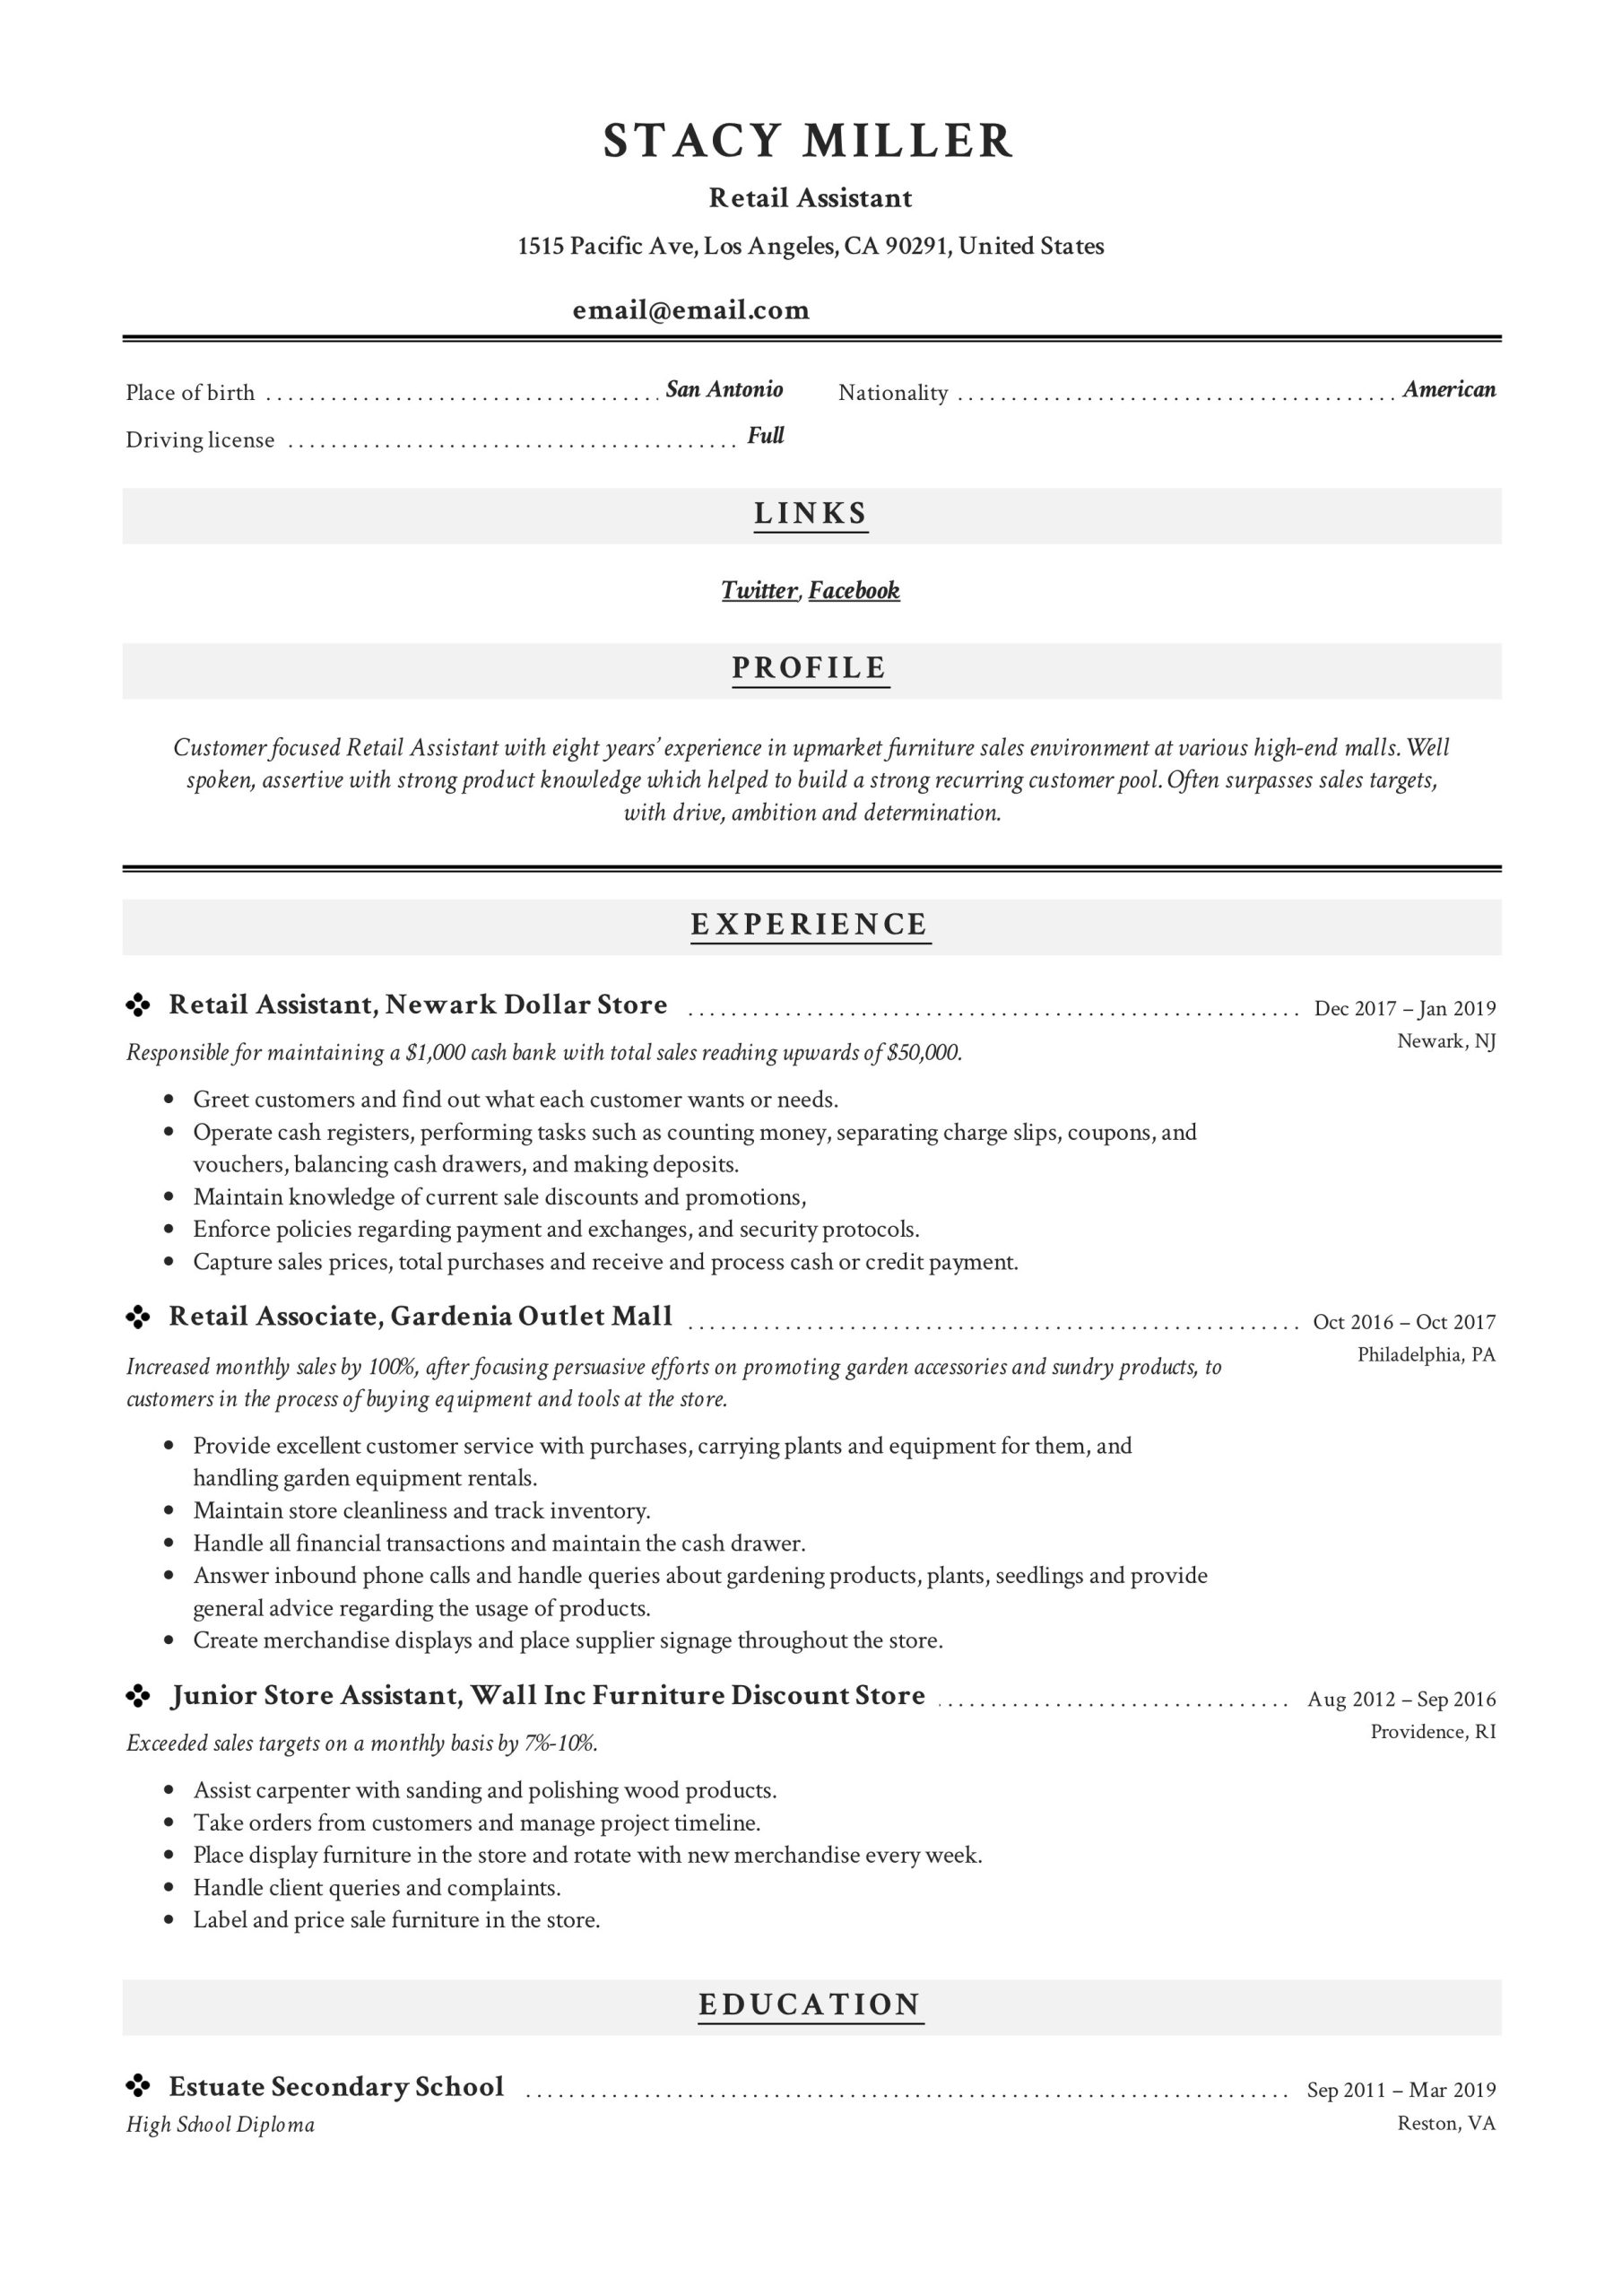 Sample Resumes for Retail assistant Manager 12 Retail assistant Resume Samples & Writing Guide – Resumeviking.com